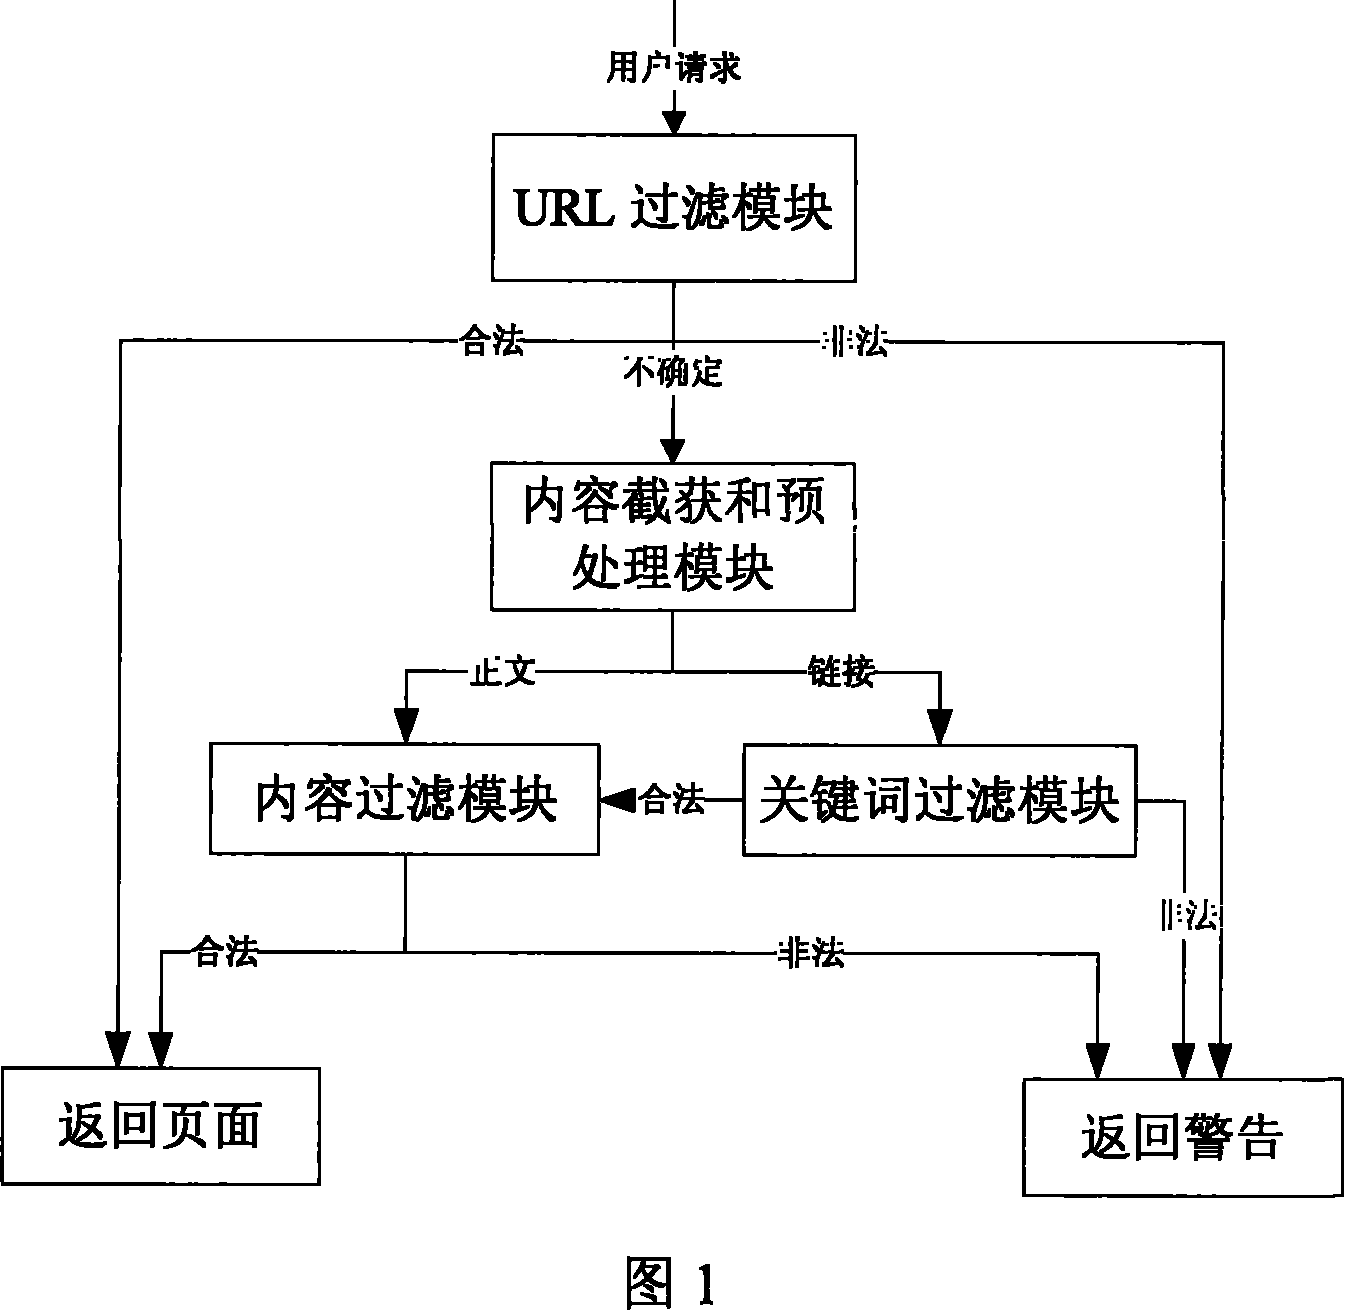 Three-folded webpage text content recognition and filtering method based on the Chinese punctuation